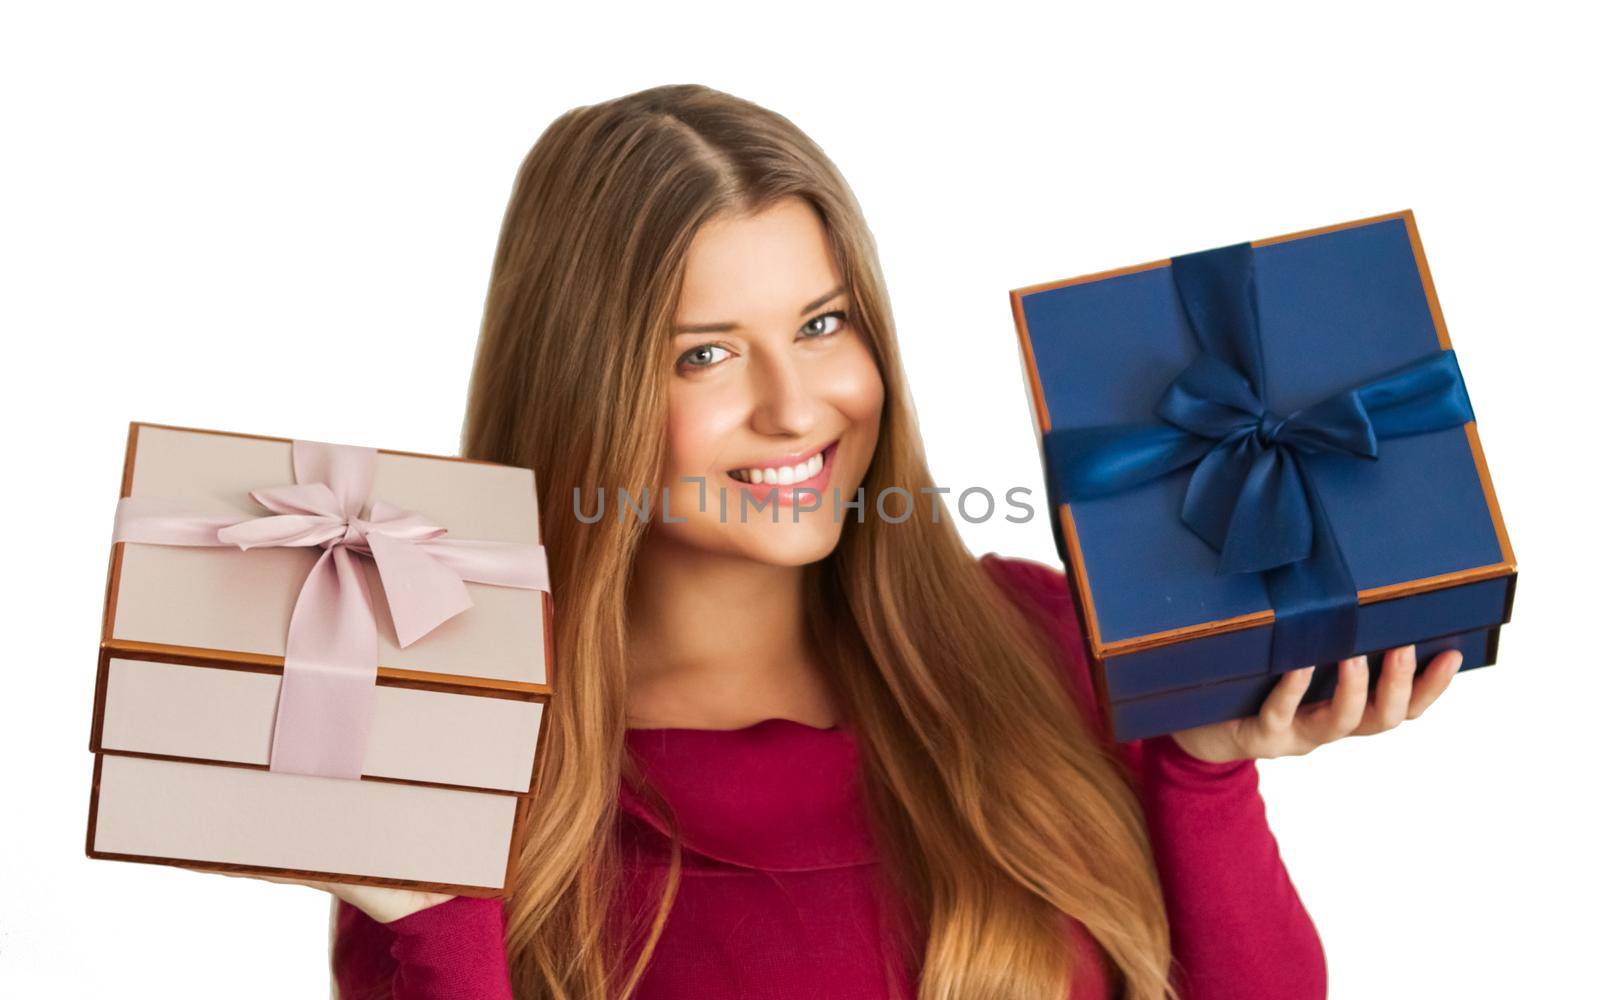 Birthday, Christmas gifts or holiday present, happy woman holding gift boxes isolated on white background by Anneleven